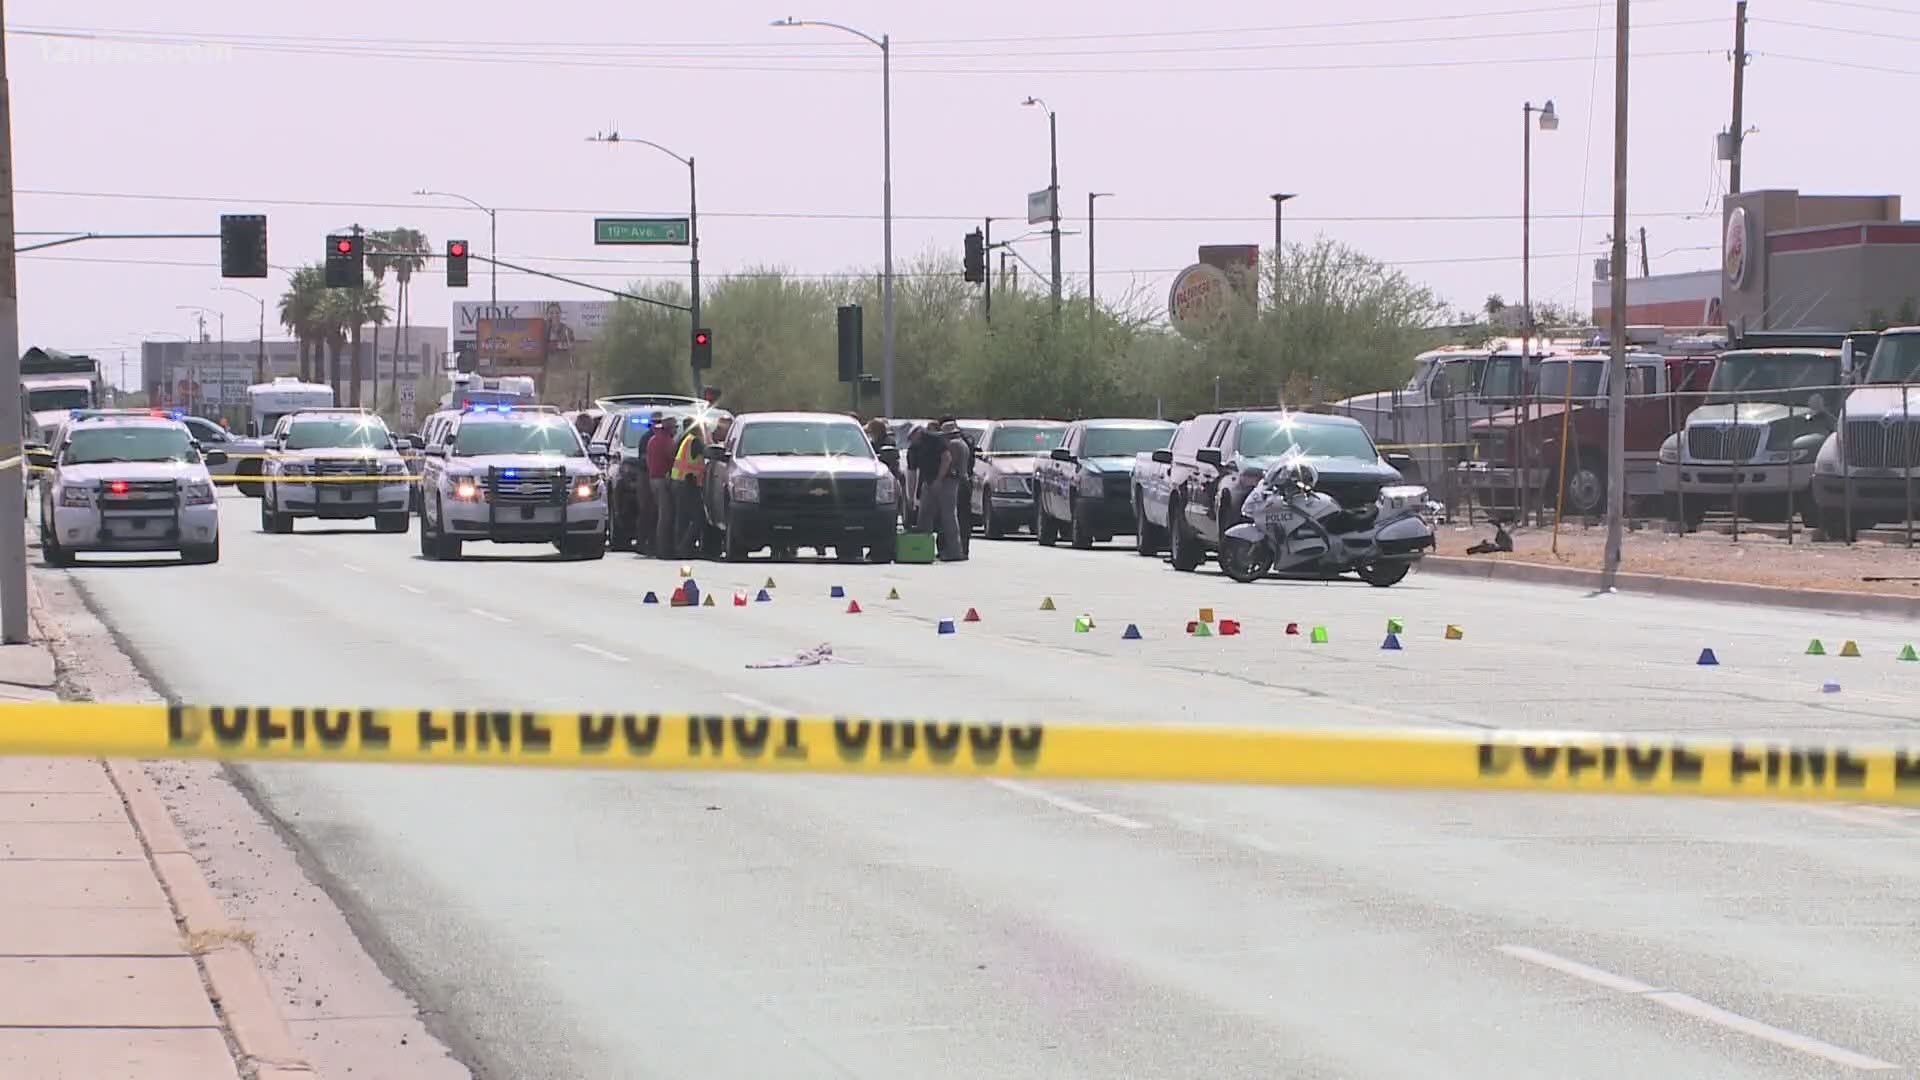 Five people, including three young children, were injured after a crash involving a Phoenix police officer early Monday.